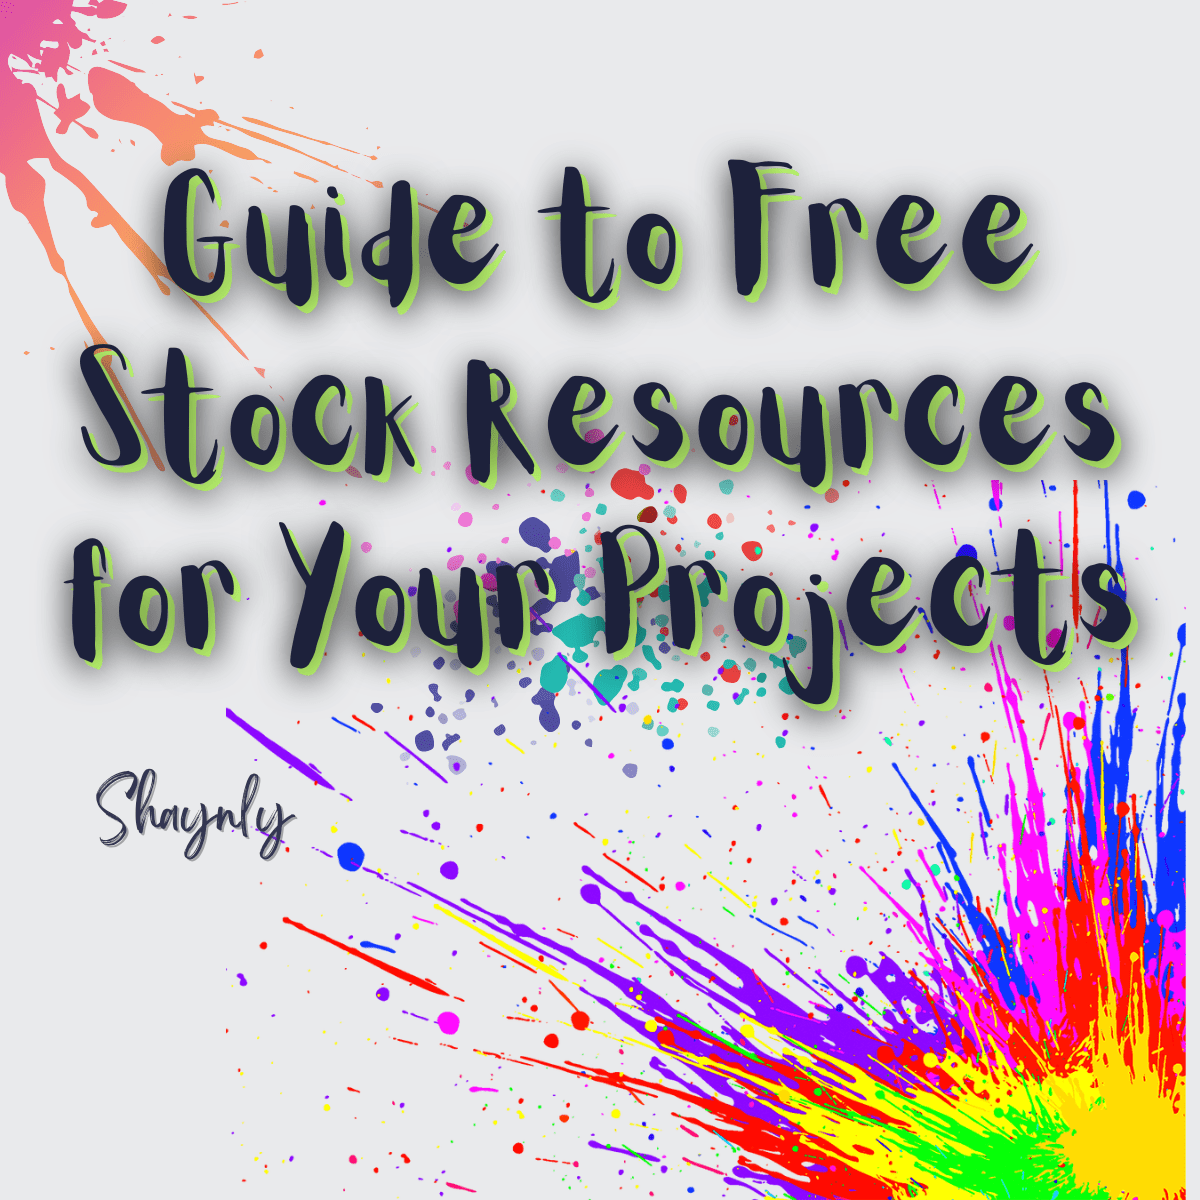 Guide to Free Stock Resources for Your Projects